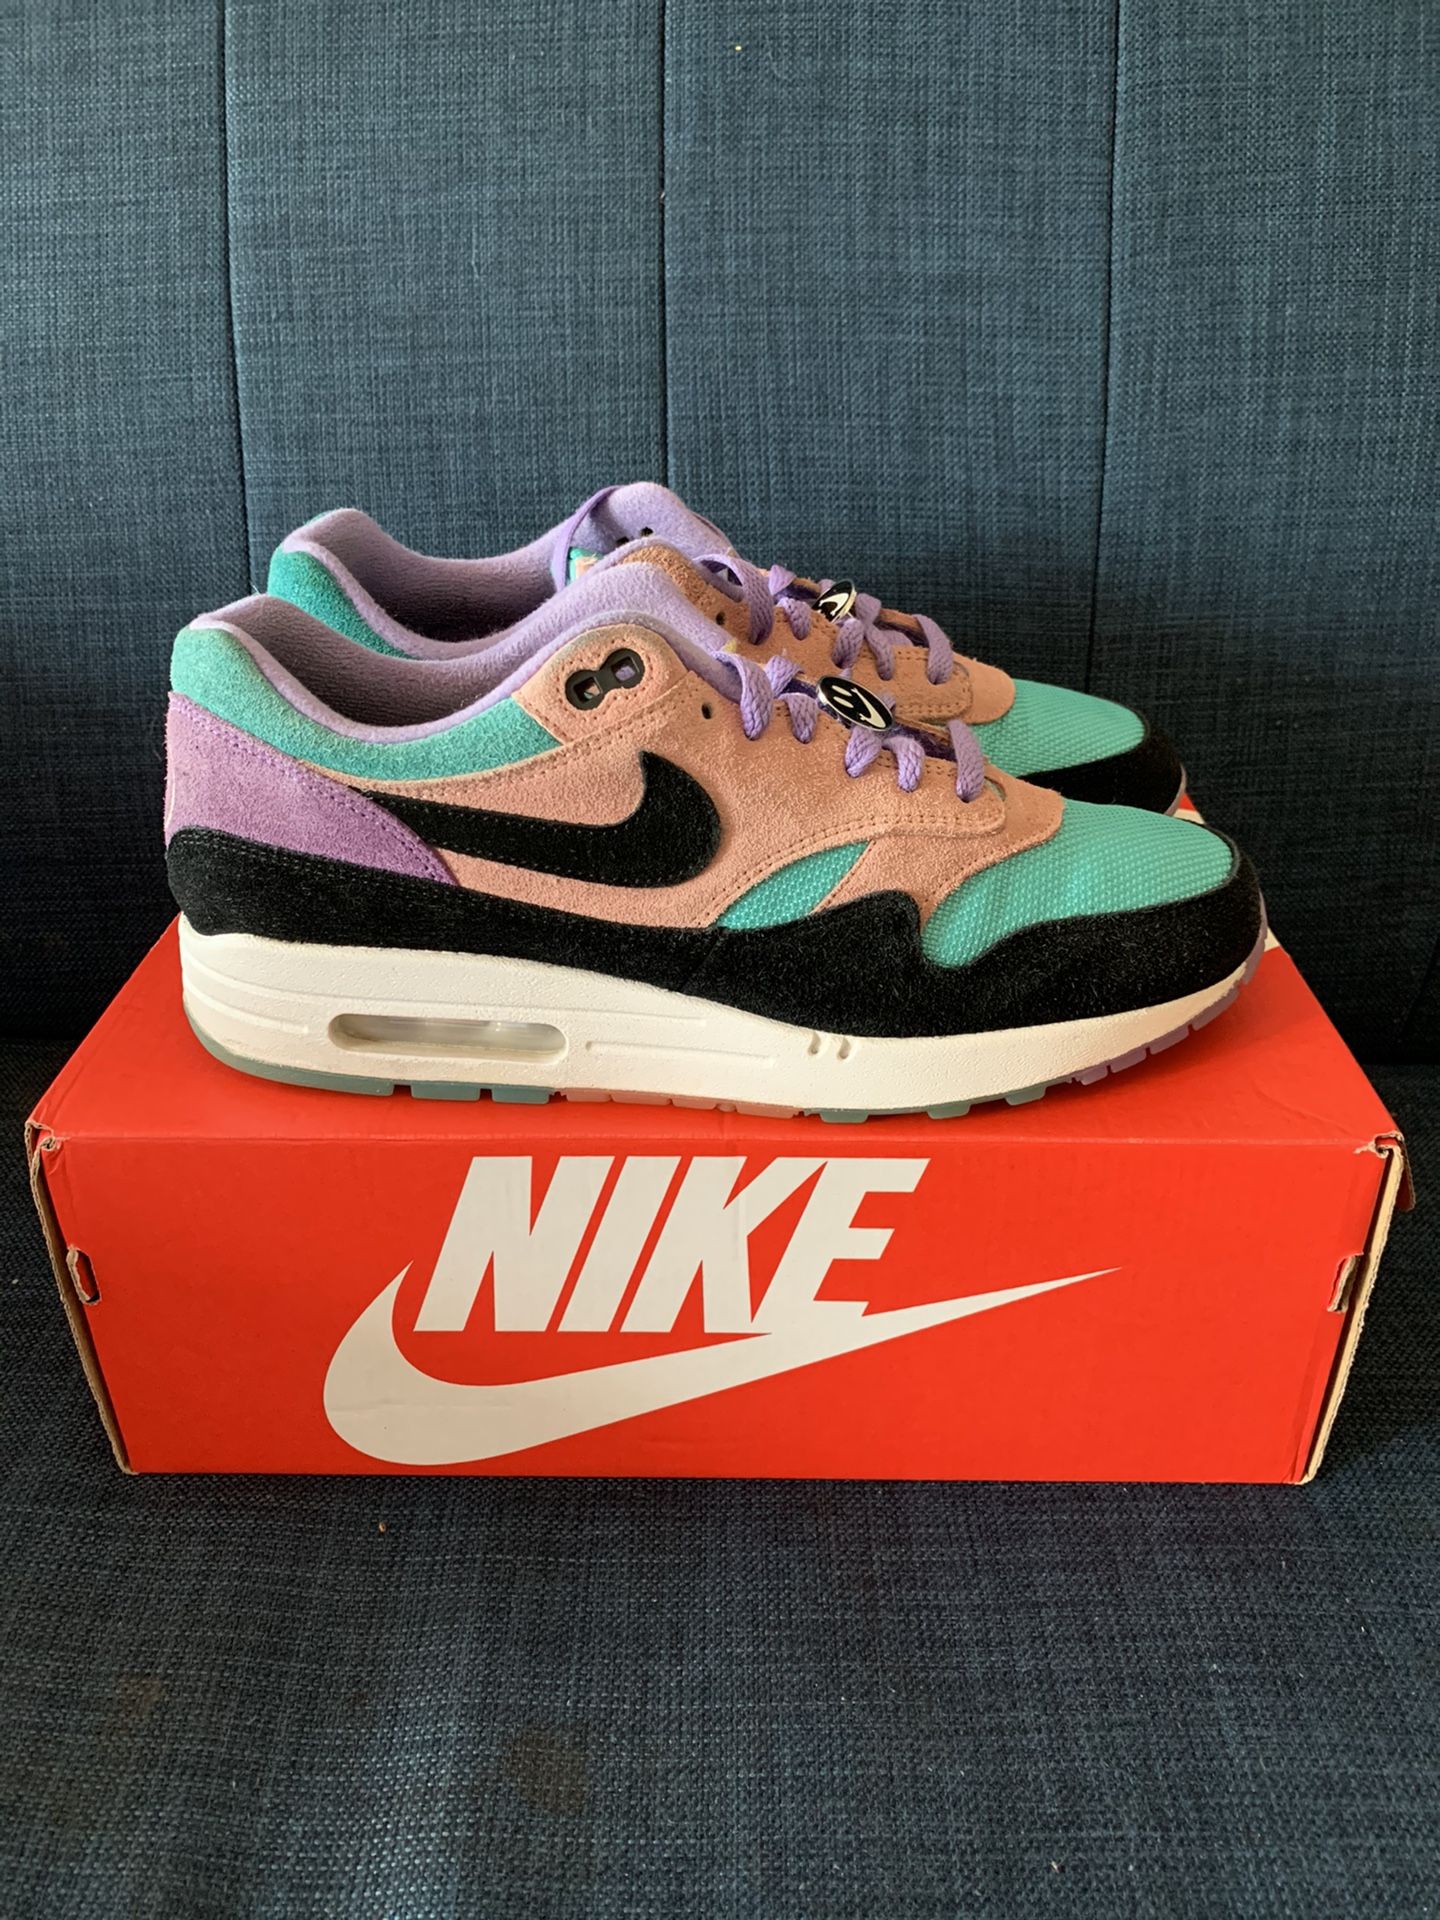 Nike Air Max 1 Have a Nike day